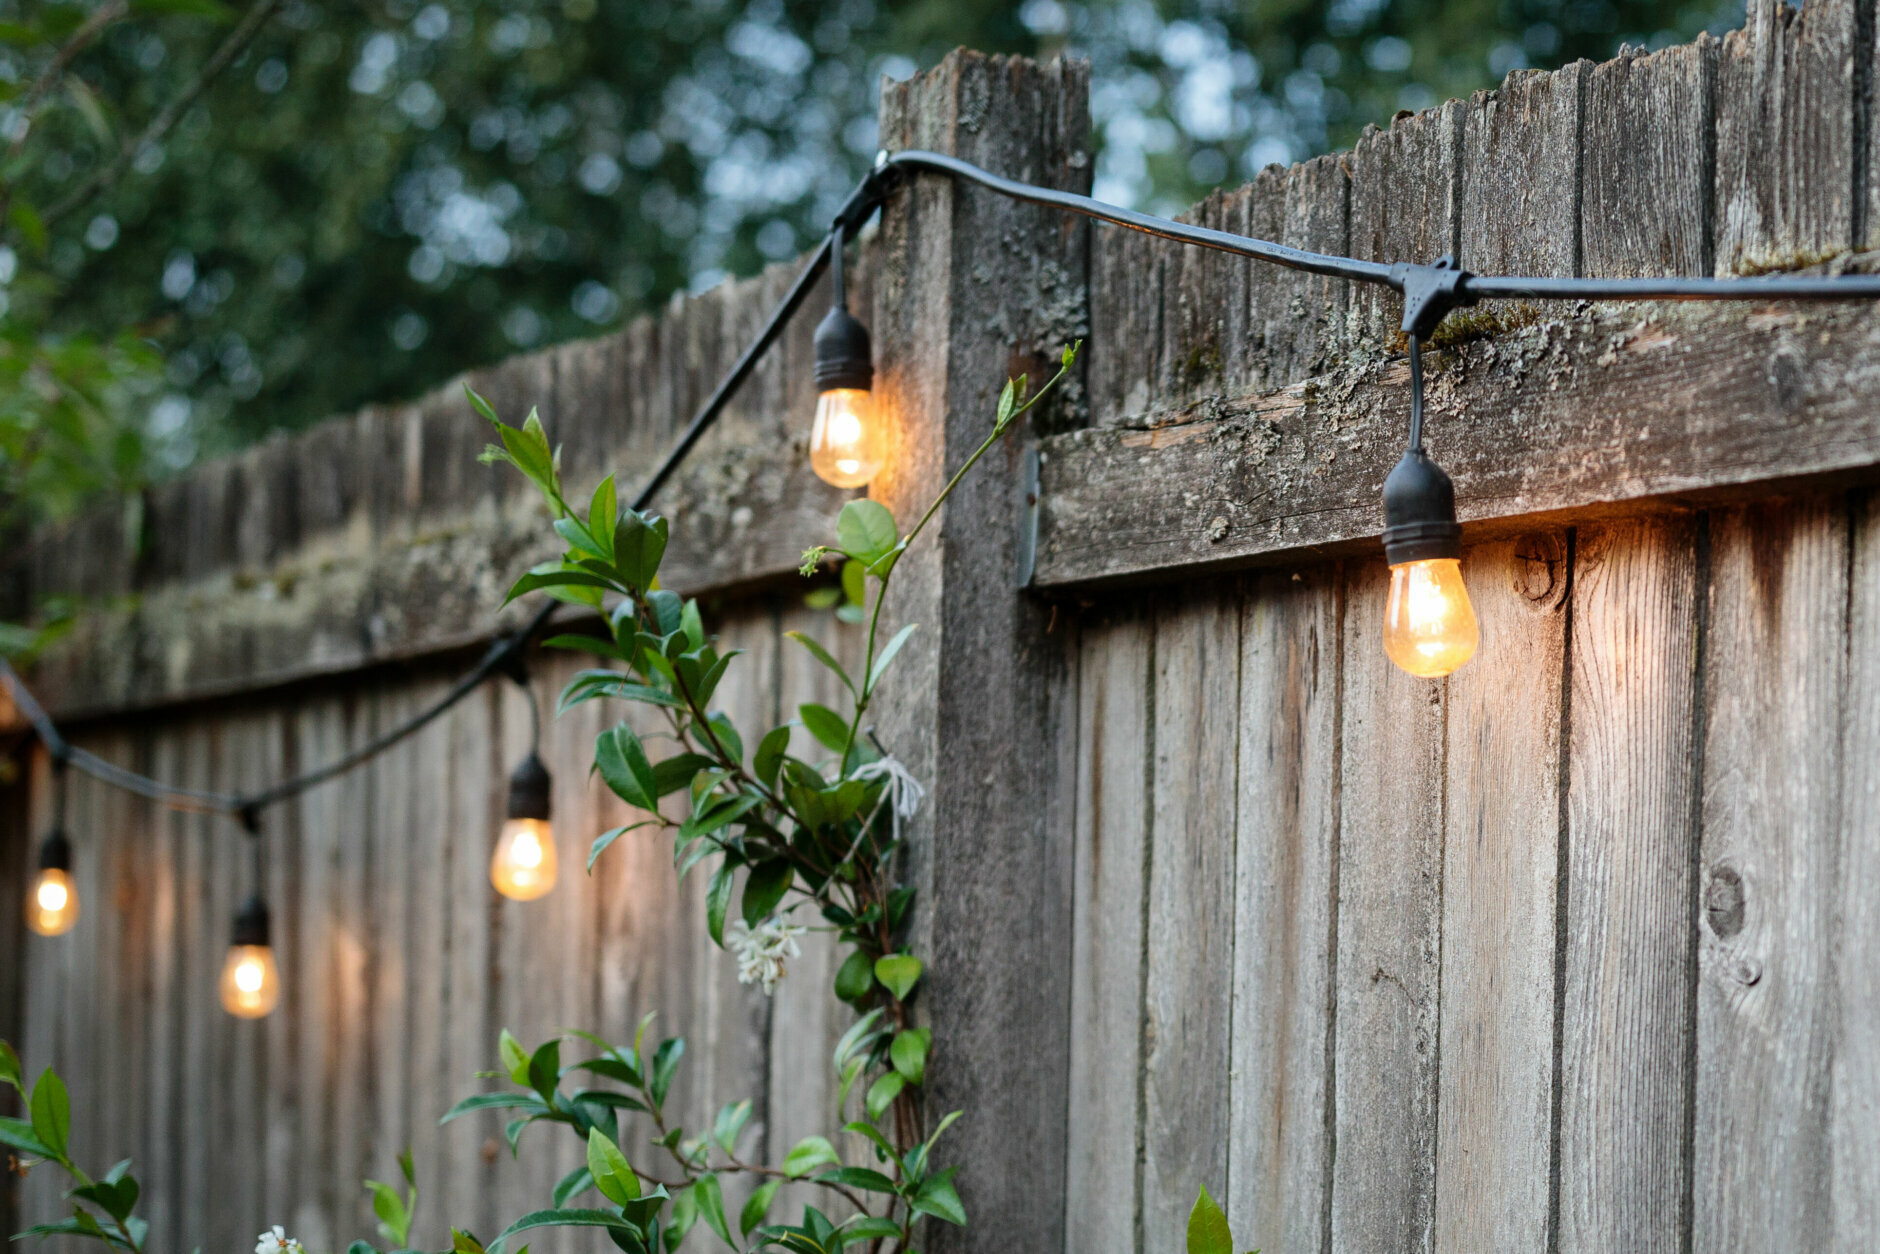 <p><strong>Brighten your fence and the surrounding area with year-round lighting.</strong> Maybe you need something that requires less maintenance. Weather-resistant lights can be easily strung along a fence or connecting fence posts for added light to the surrounding space.</p>
